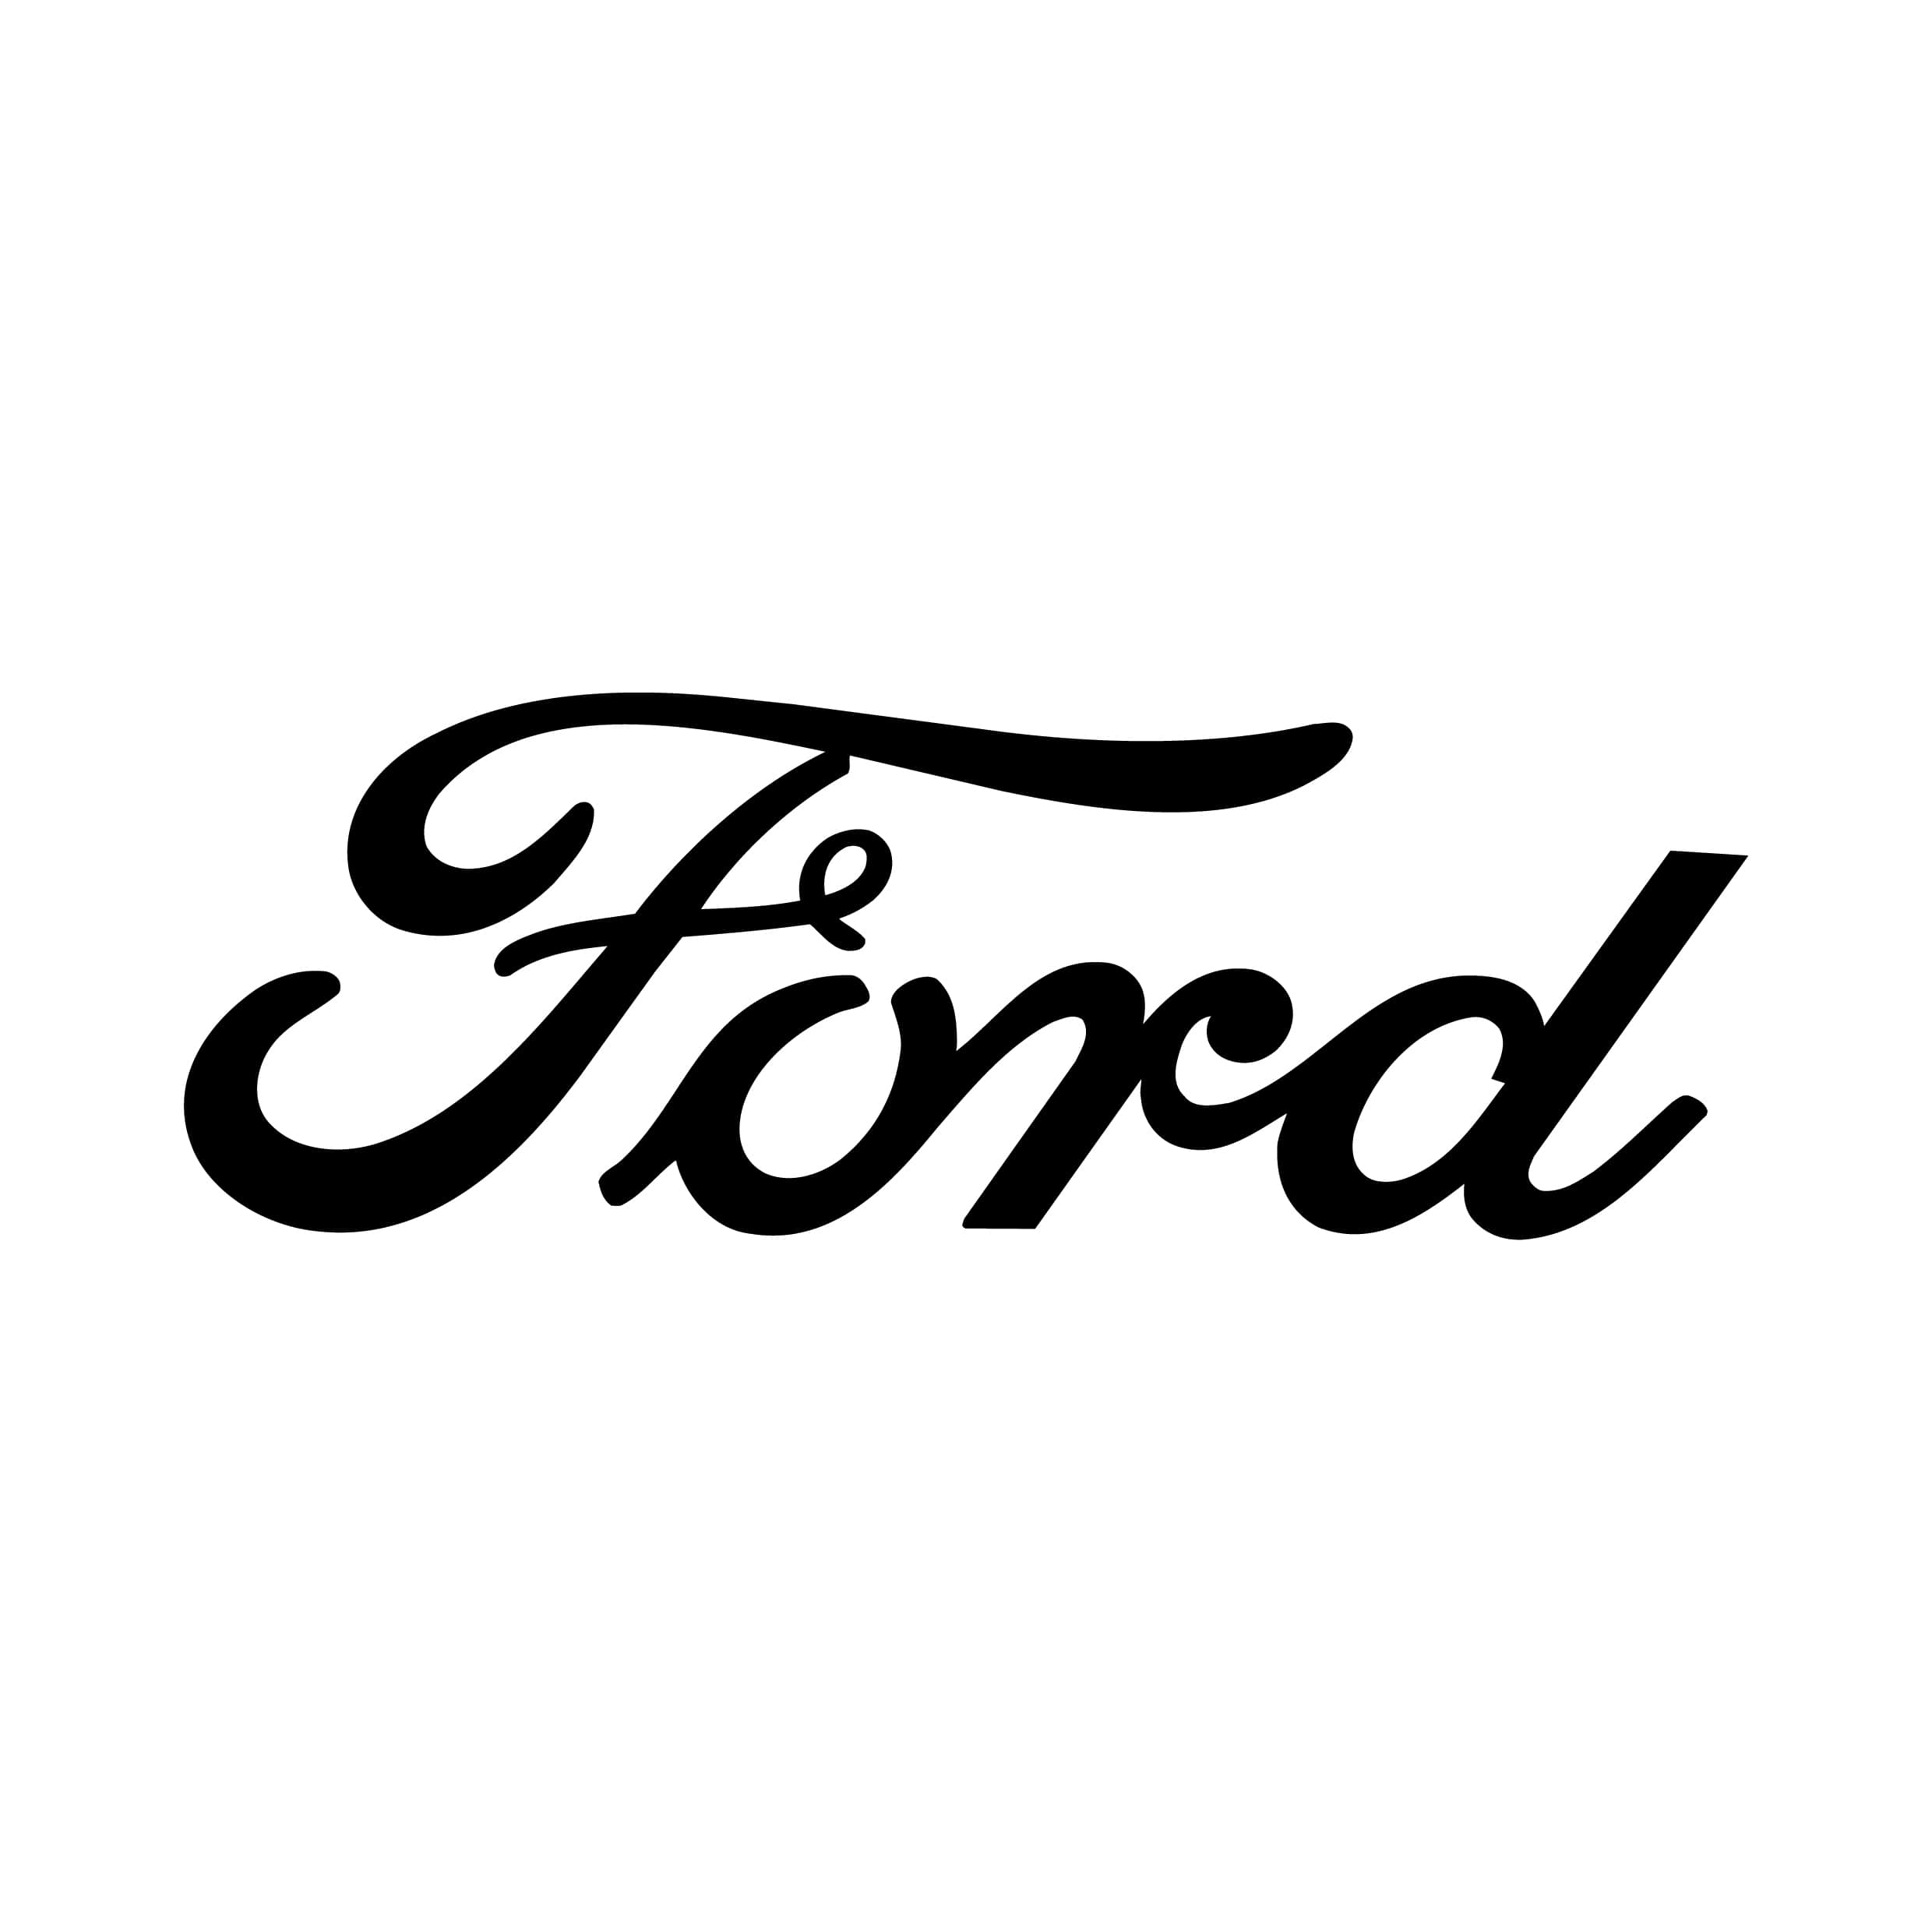 stickers-ford-ref5-autocollant-voiture-sticker-auto-autocollants-decals-sponsors-racing-tuning-sport-logo-min